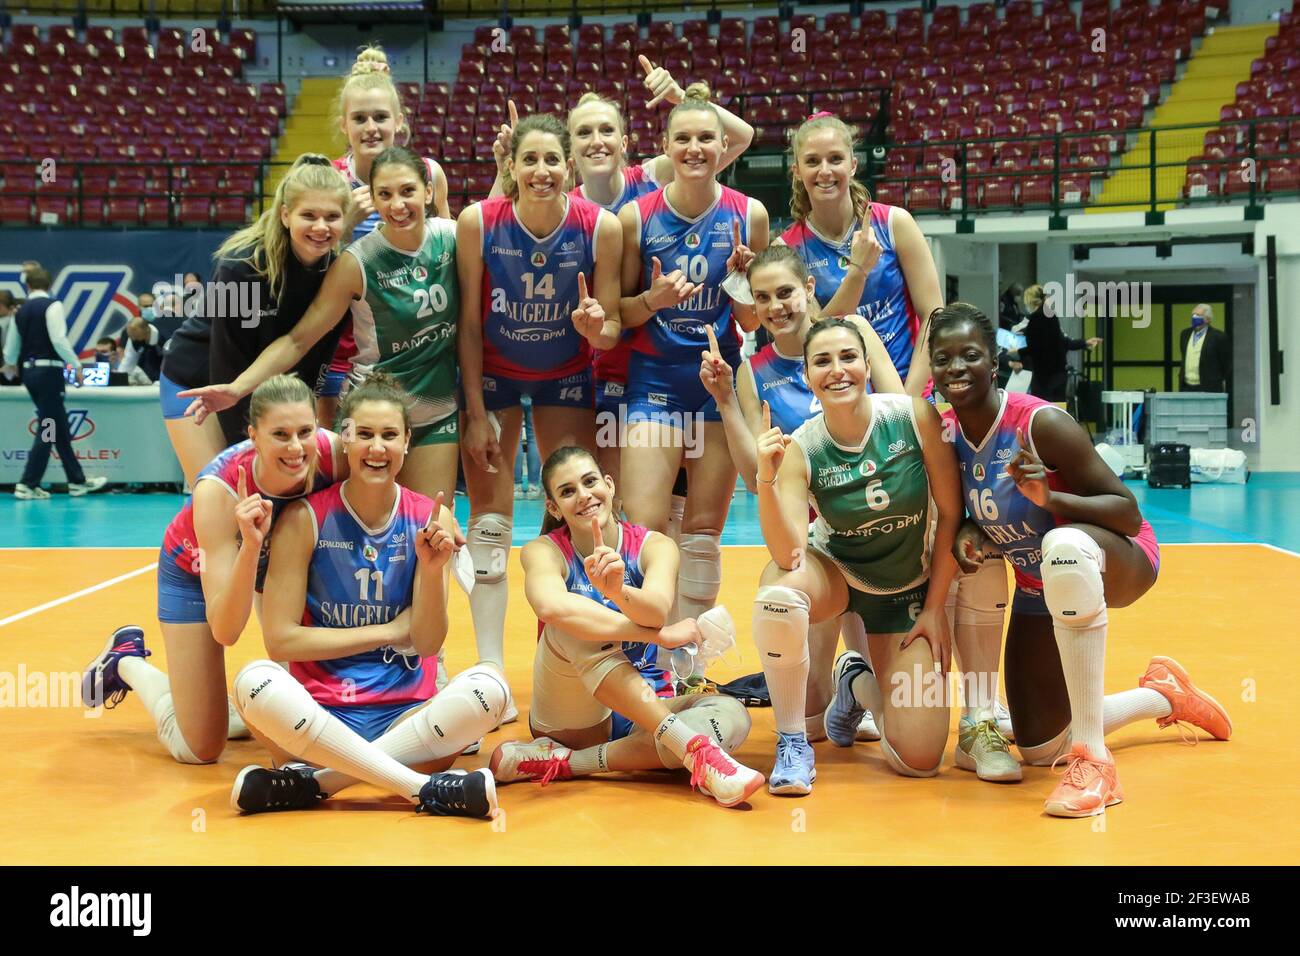 team Saugella Monza after the victory during Saugella Team Monza vs  Galatasaray Istanbul, Volleyball CEV Cup Women Championship in Monza (MB),  Italy, March 16 2021 Stock Photo - Alamy